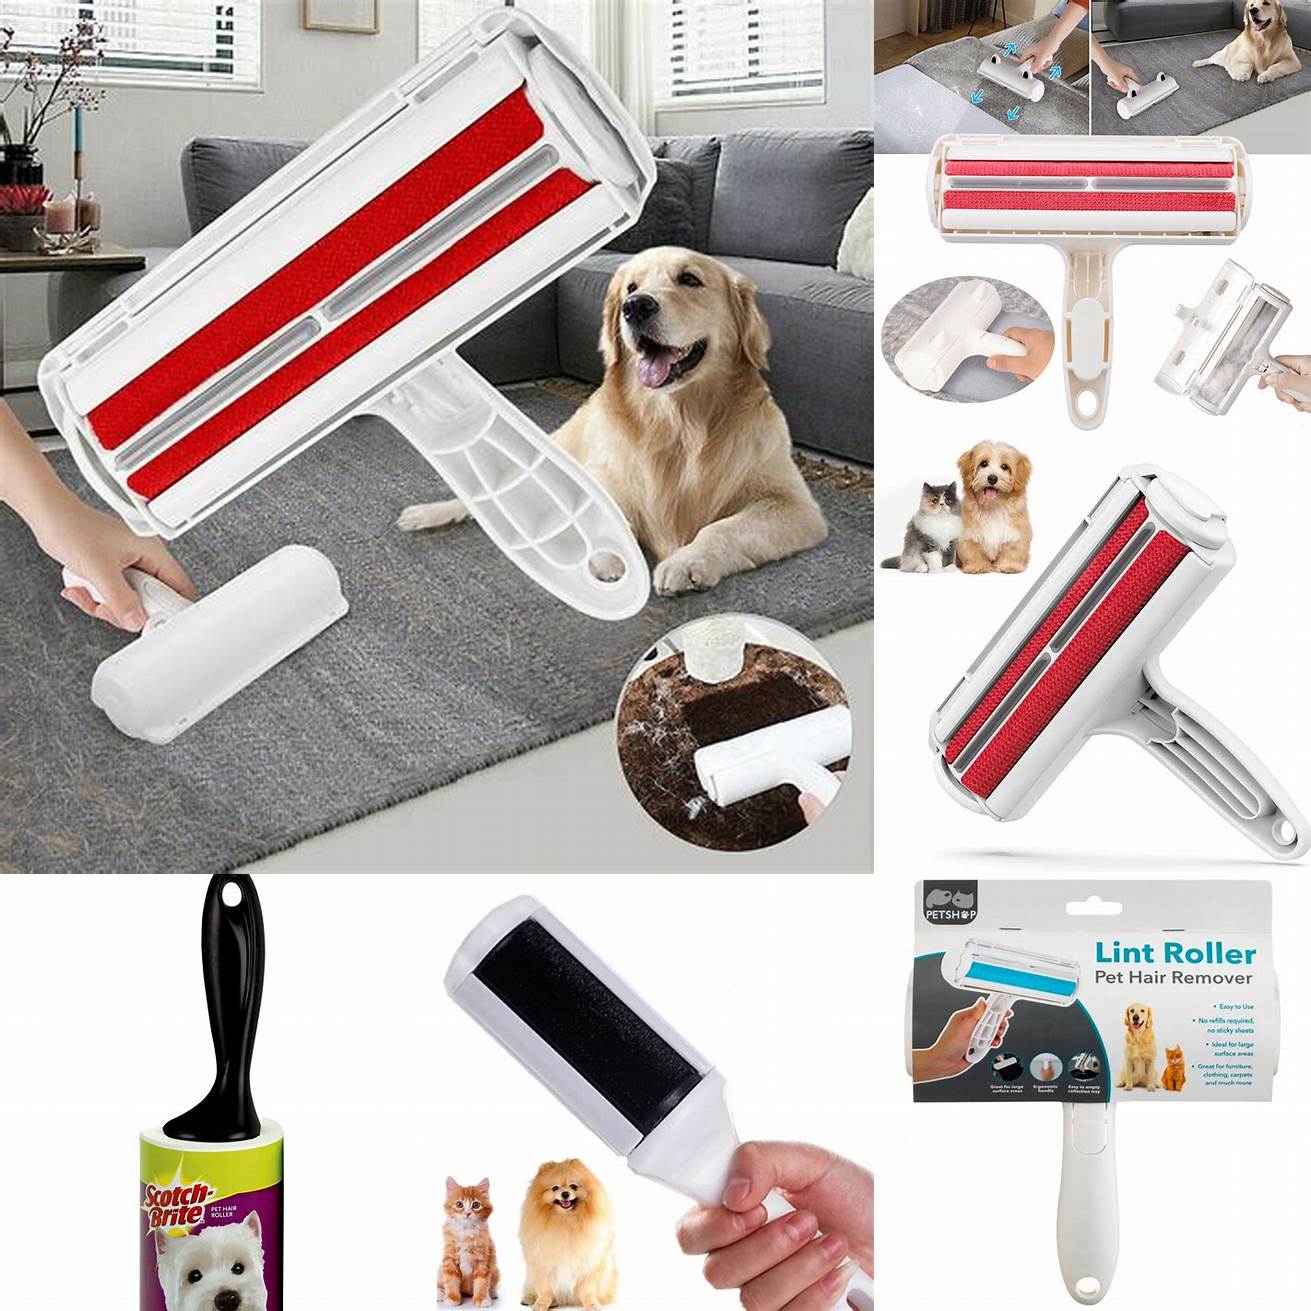 If you have pets use a lint roller or a pet hair remover to remove pet hair and dander from the sofa You can also cover the sofa with a pet-friendly throw or cushion to protect it from scratches and stains